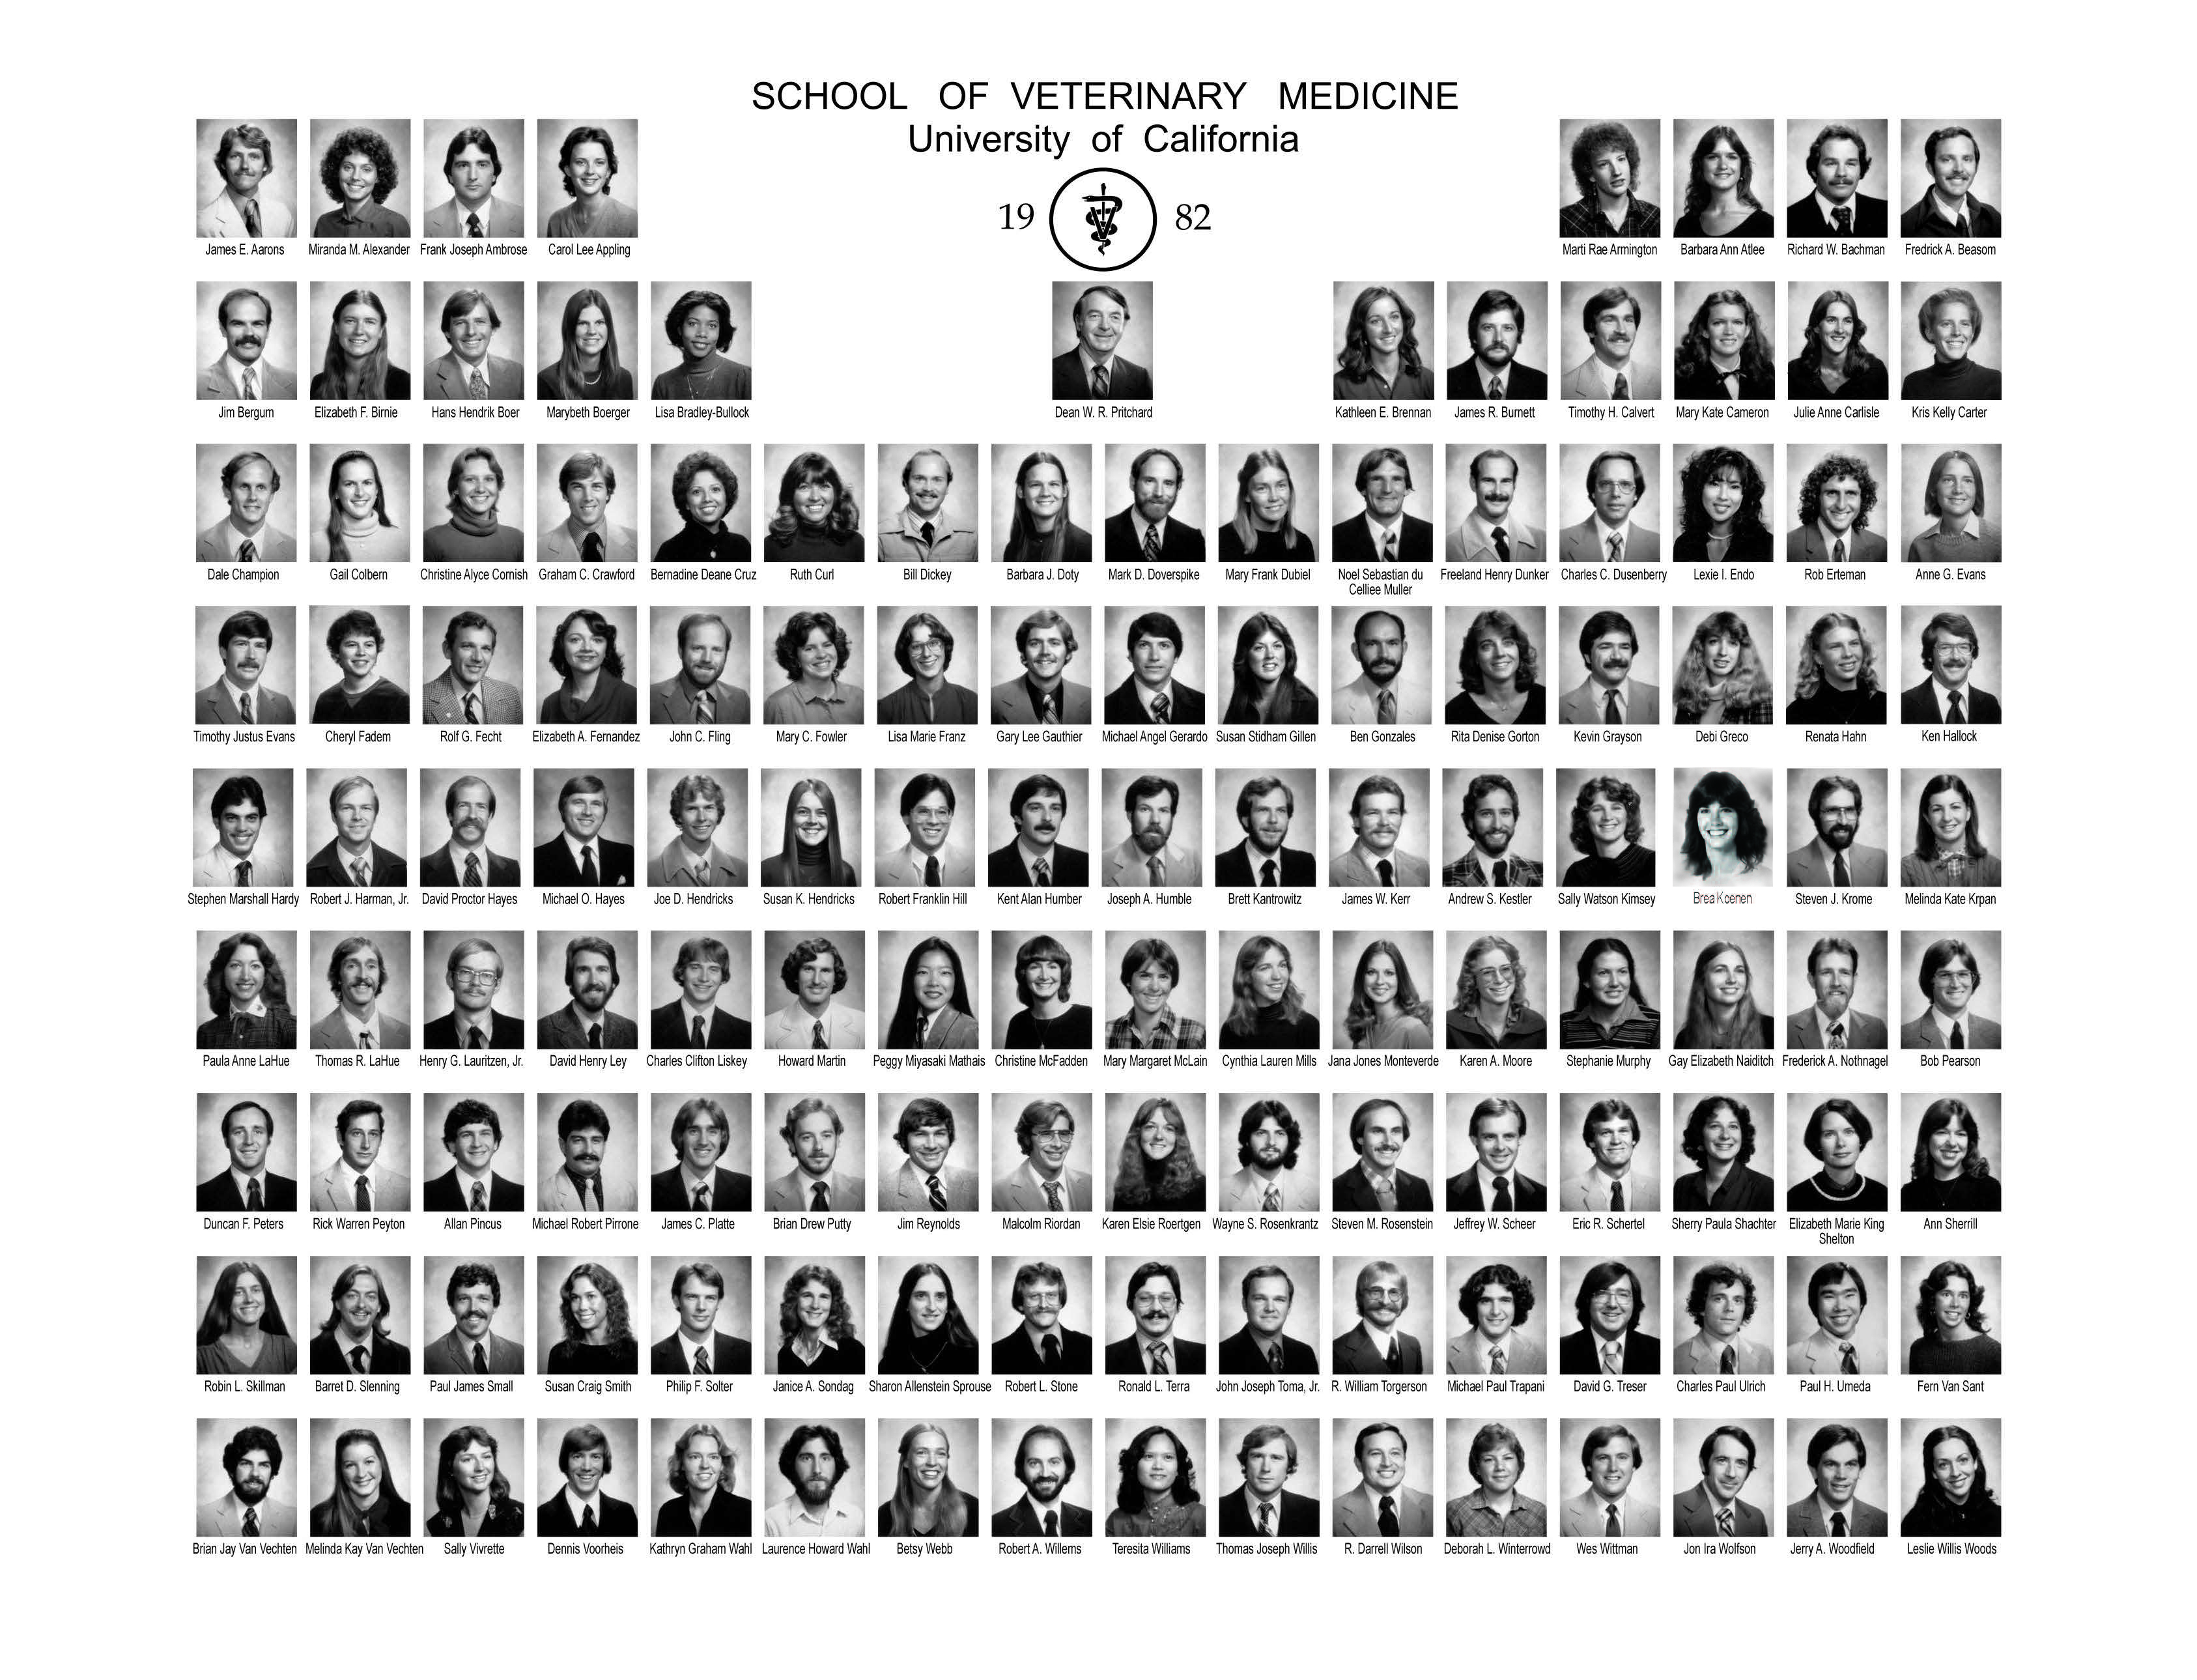 Updated 1981 class composite photo